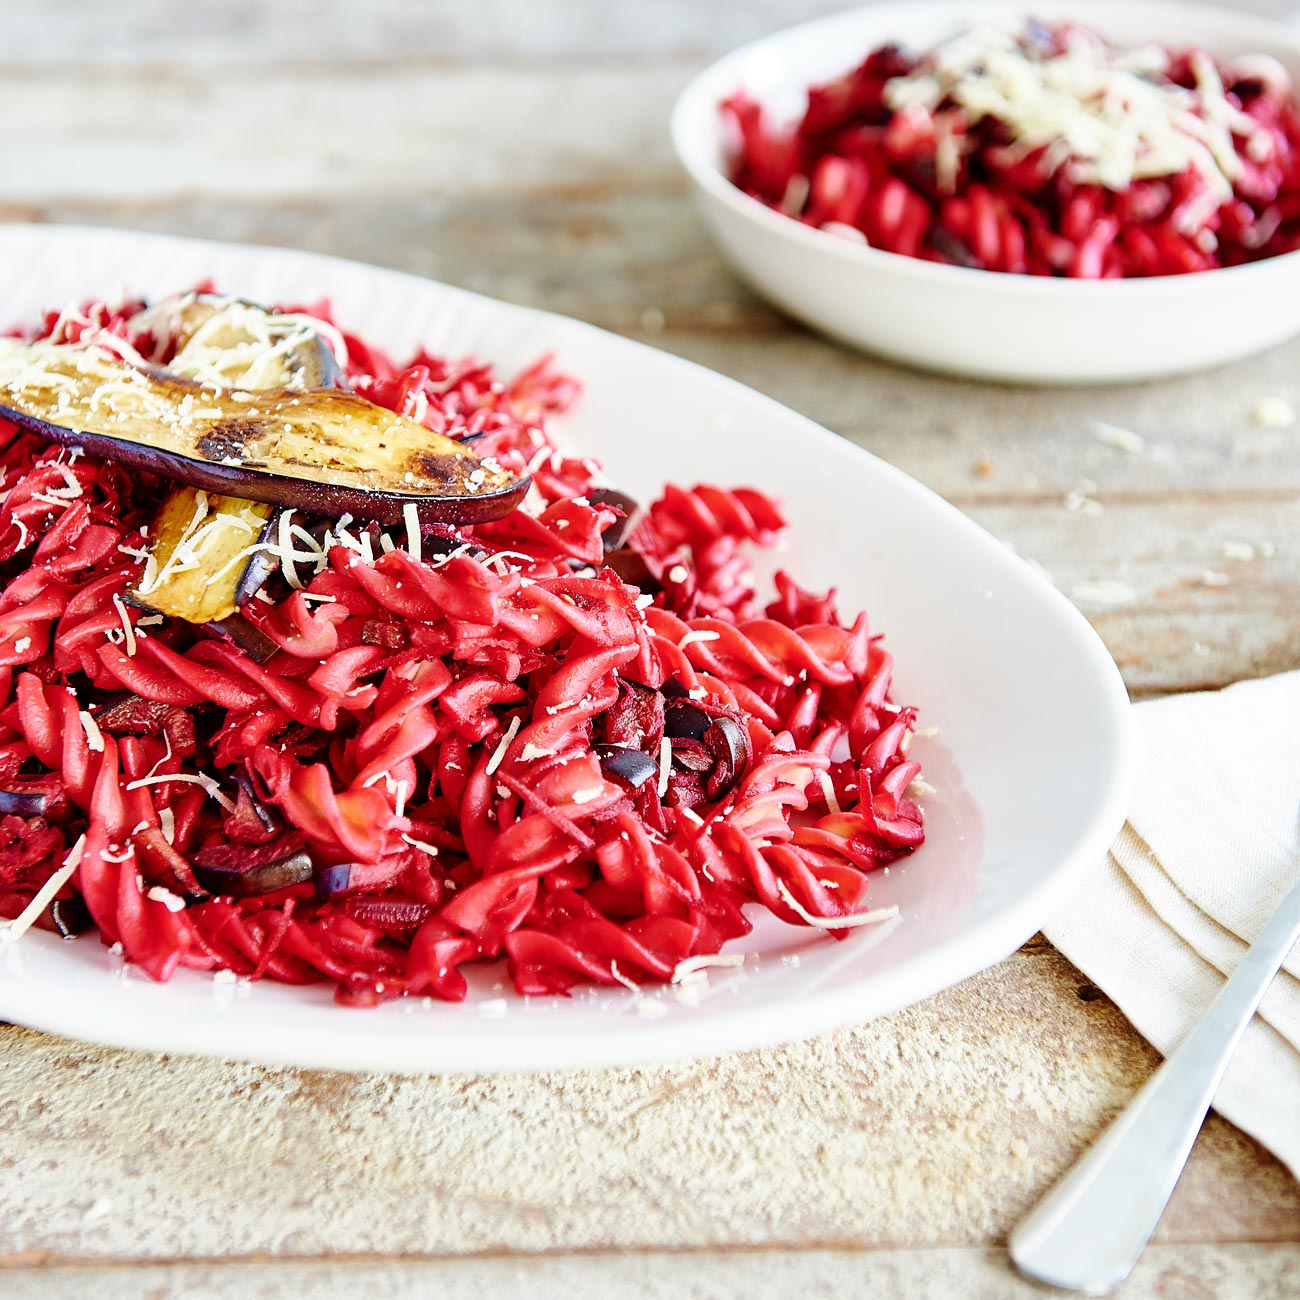 Beetroot and Eggplant Pasta Salad with SMART Protein Spirals